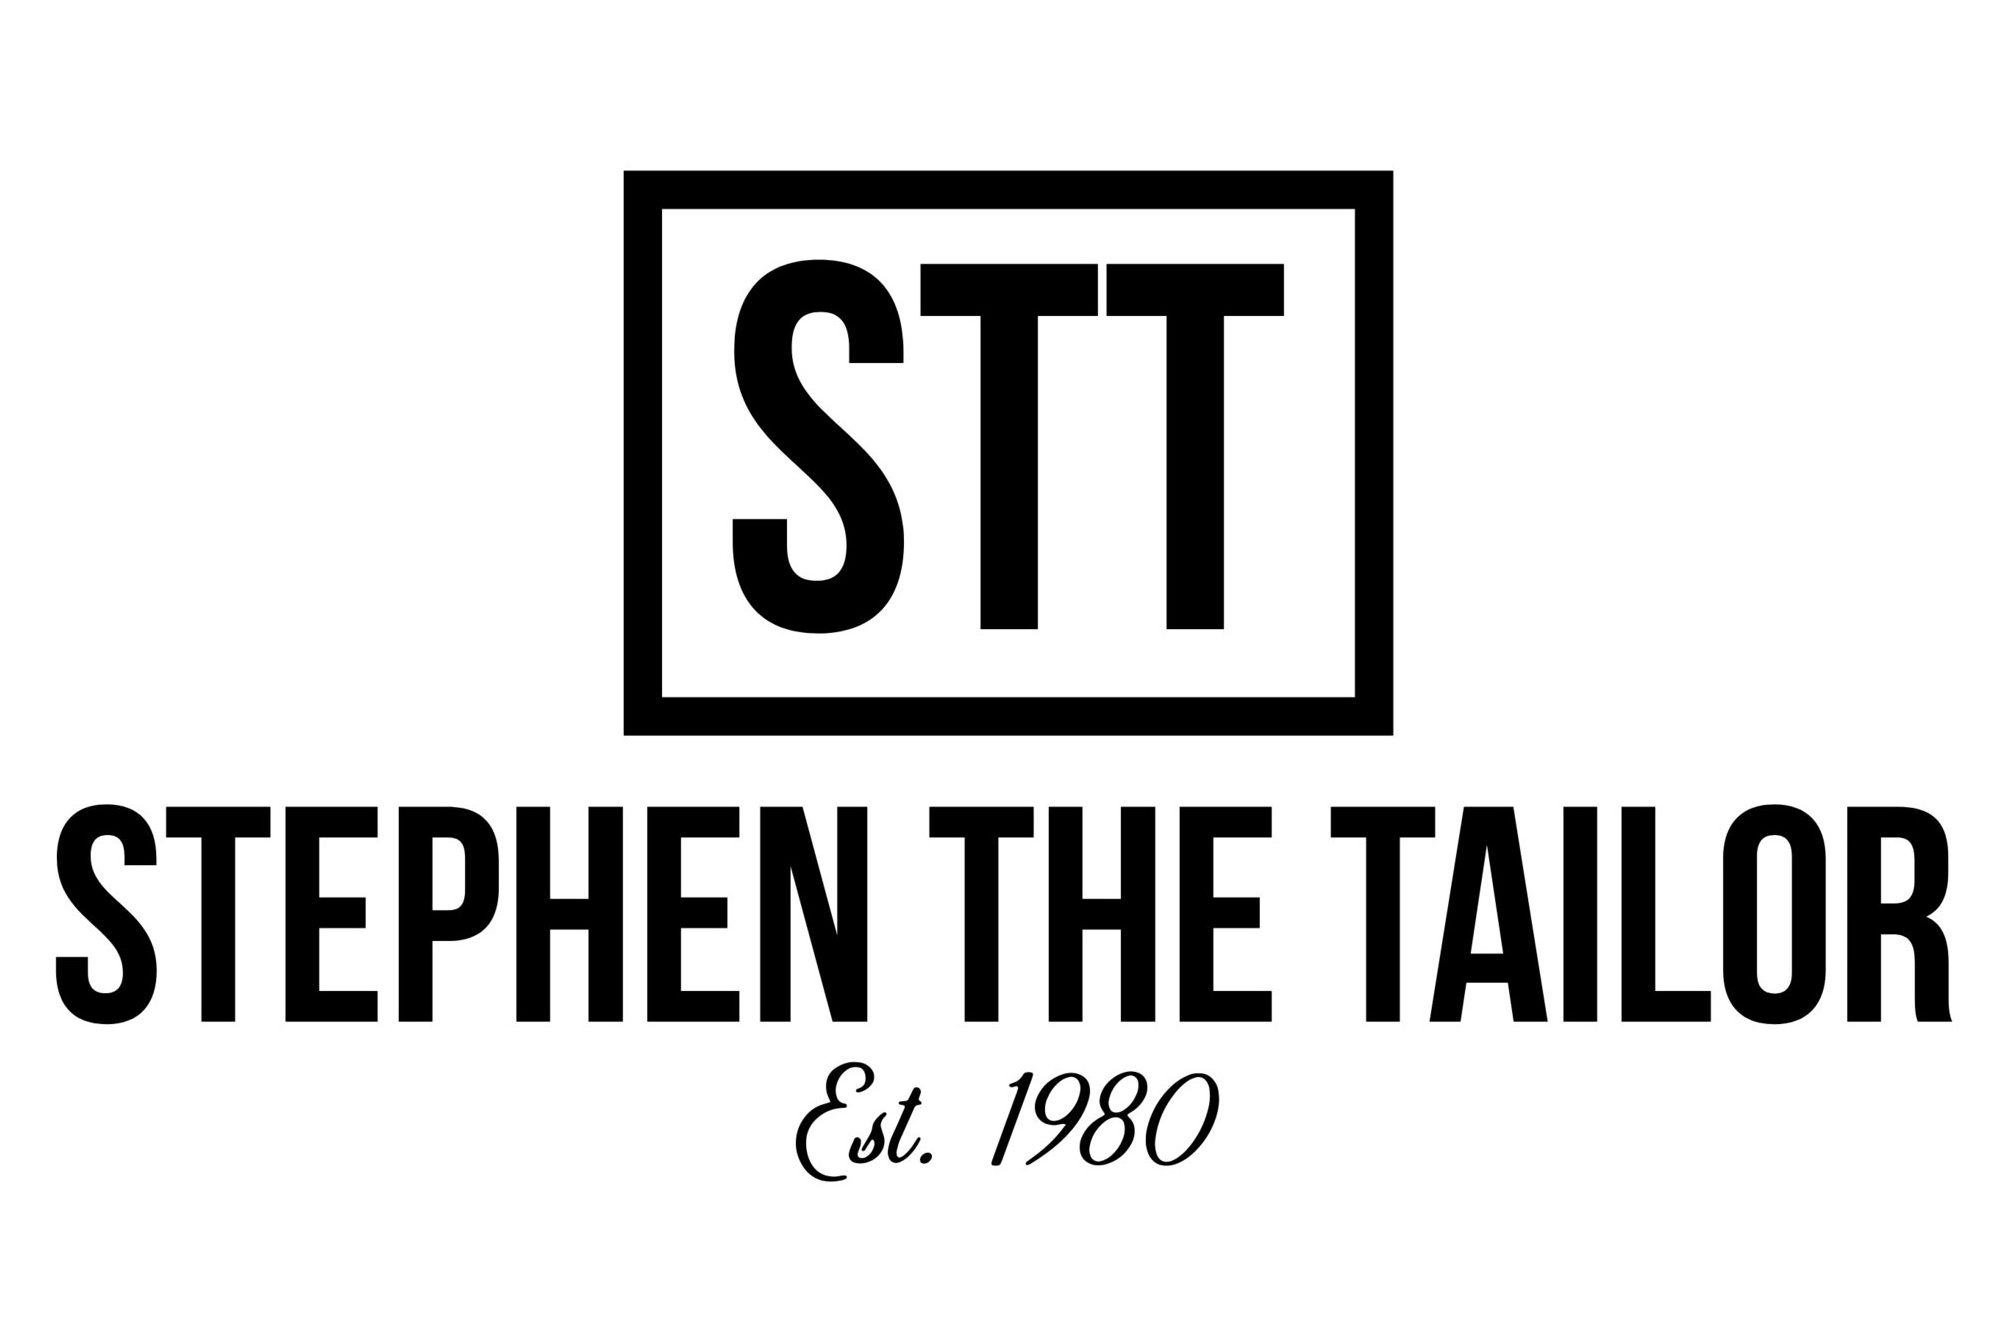 Stephen the Tailor